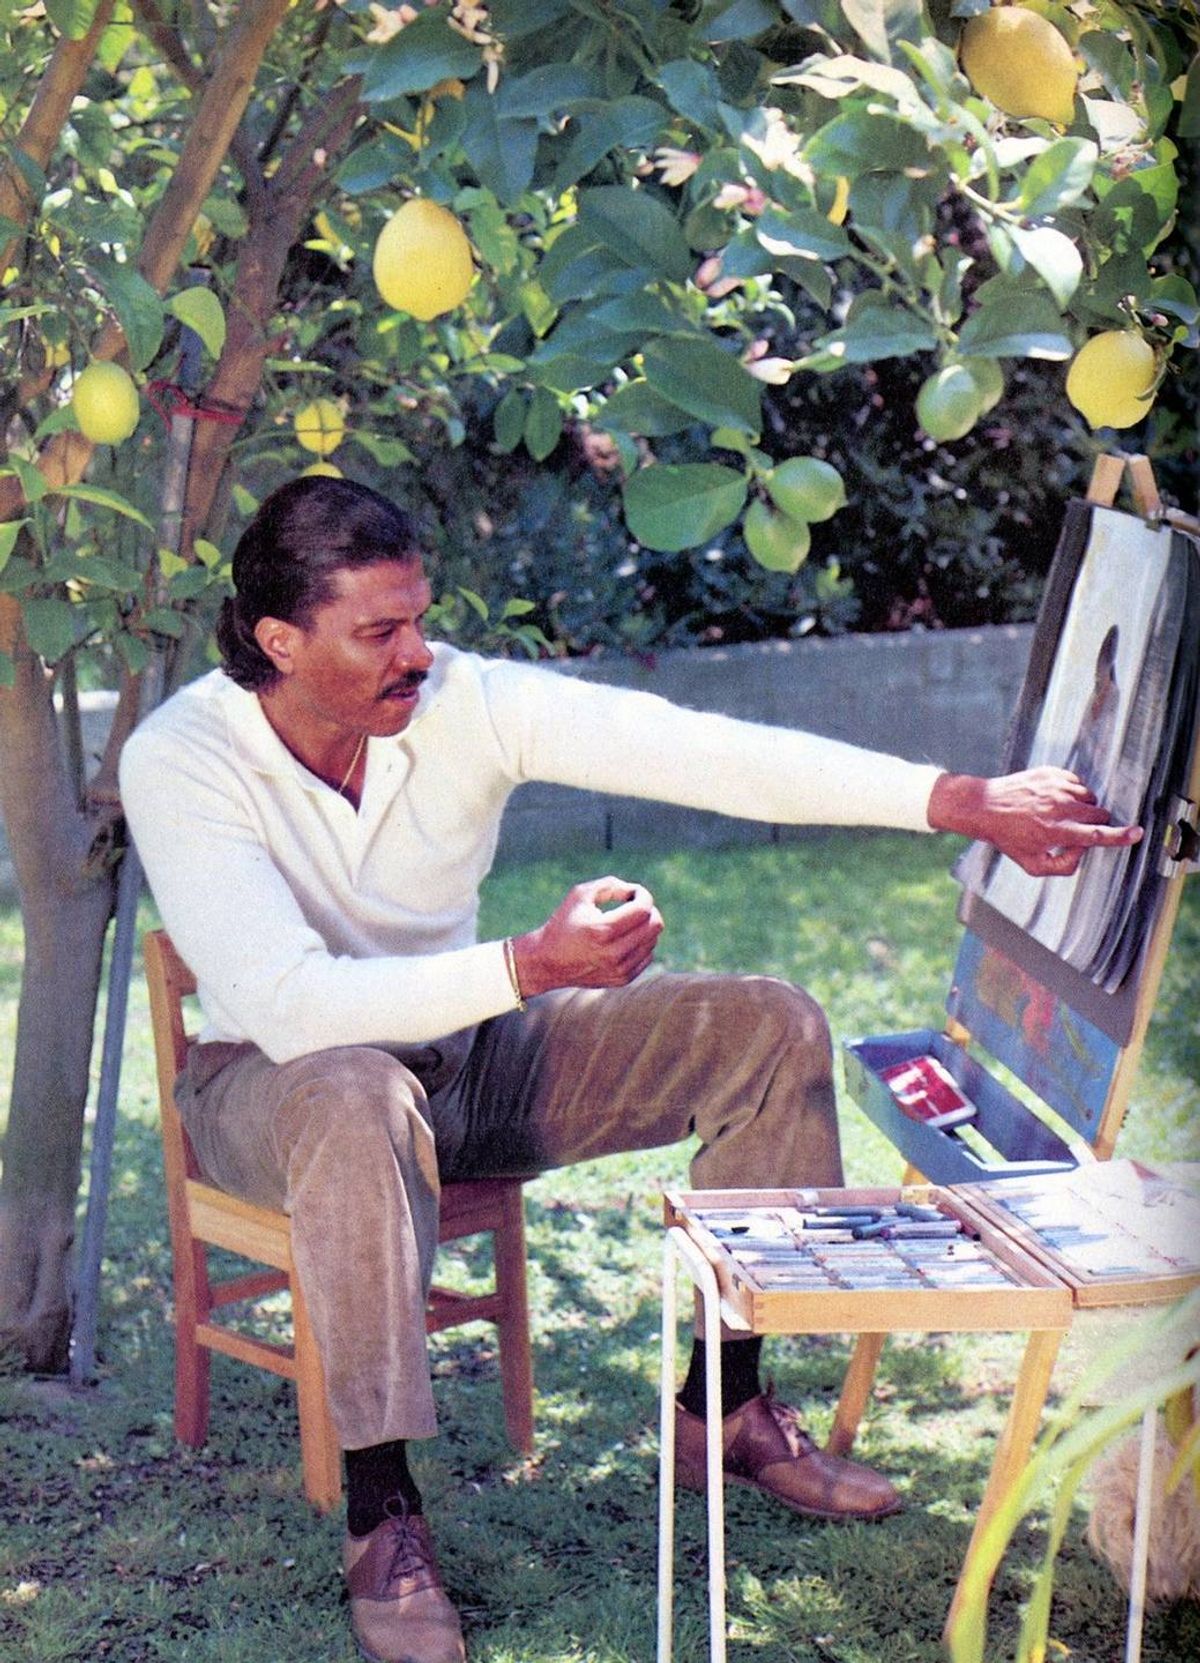 Billy Dee Williams paints in a vintage copy of GQ